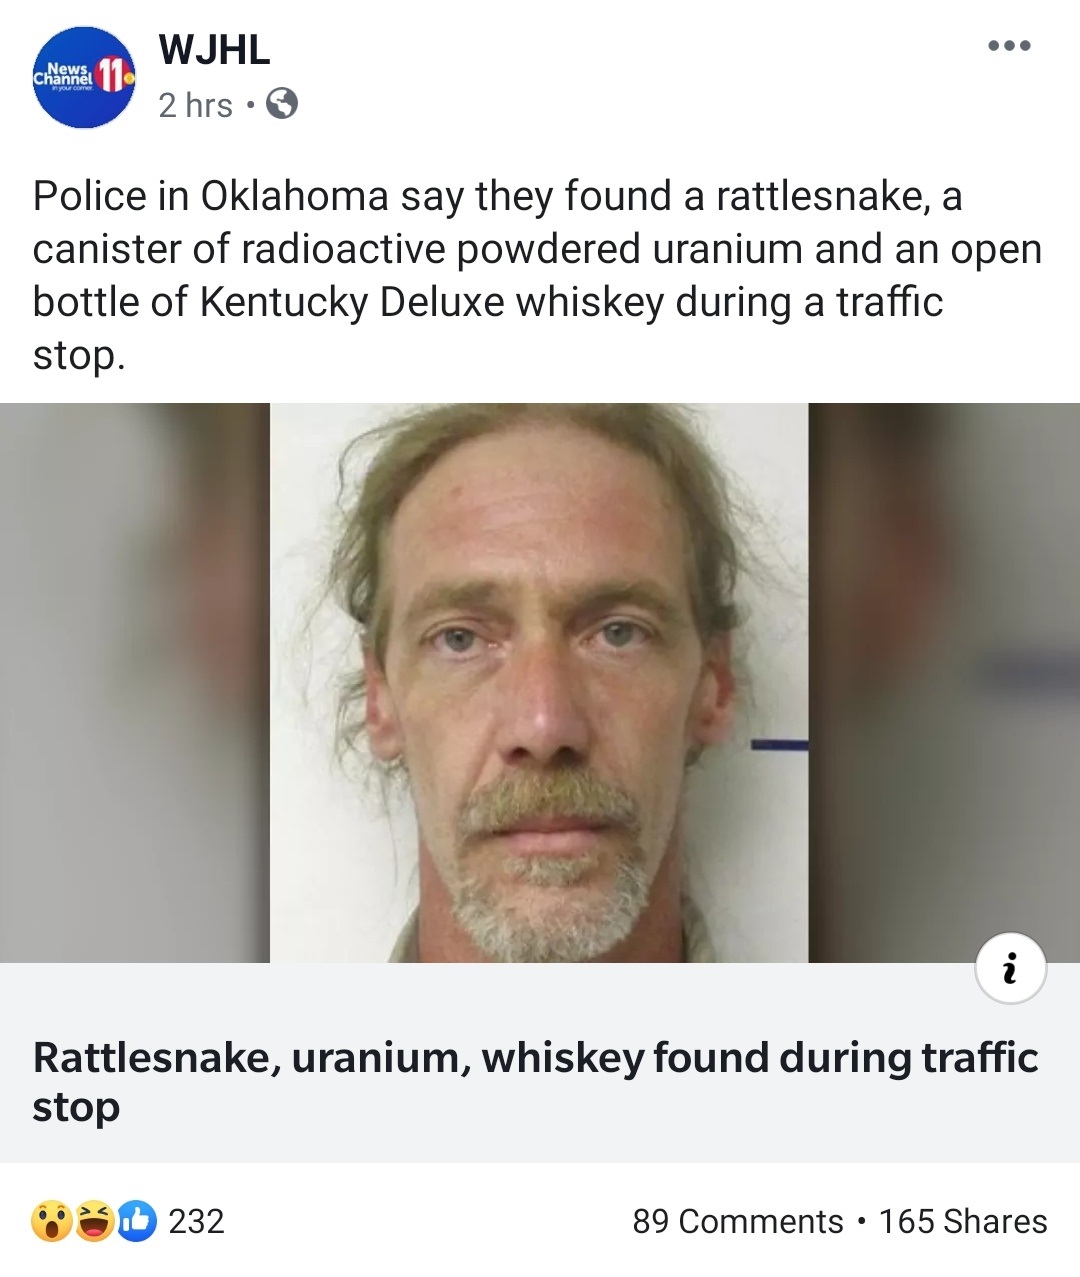 News Channel Wjhl 2 hrs Police in Oklahoma say they found a rattlesnake, a canister of radioactive powdered uranium and an open bottle of Kentucky Deluxe whiskey during a traffic stop. Rattlesnake, uranium, whiskey found during traffic